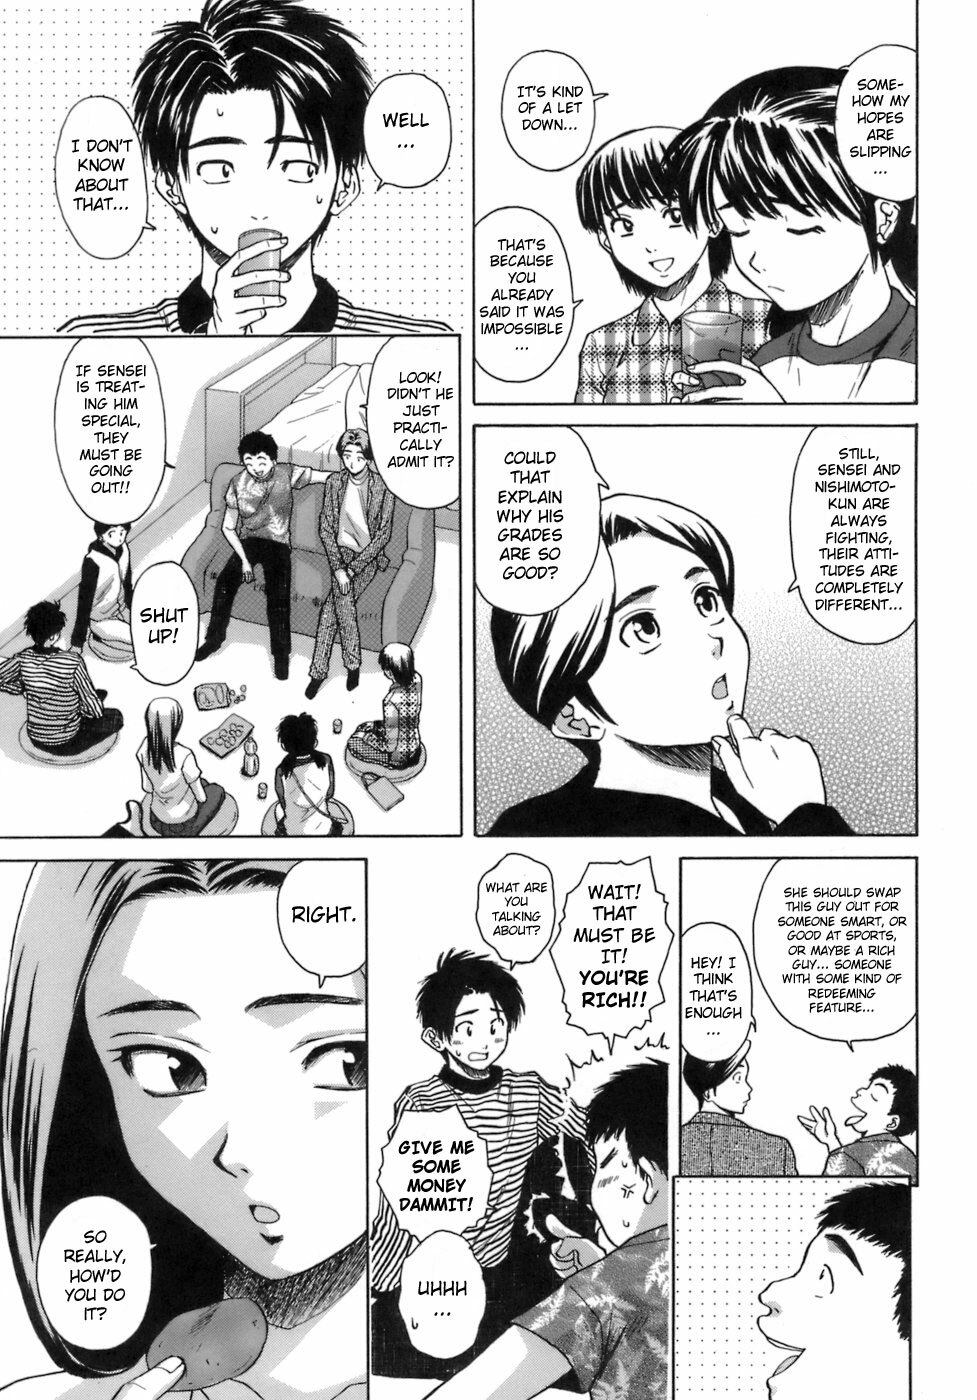 [Fuuga] Kyoushi to Seito to - Teacher and Student Ch. 6 [English] [AKnightWhoSaysNi!] page 5 full